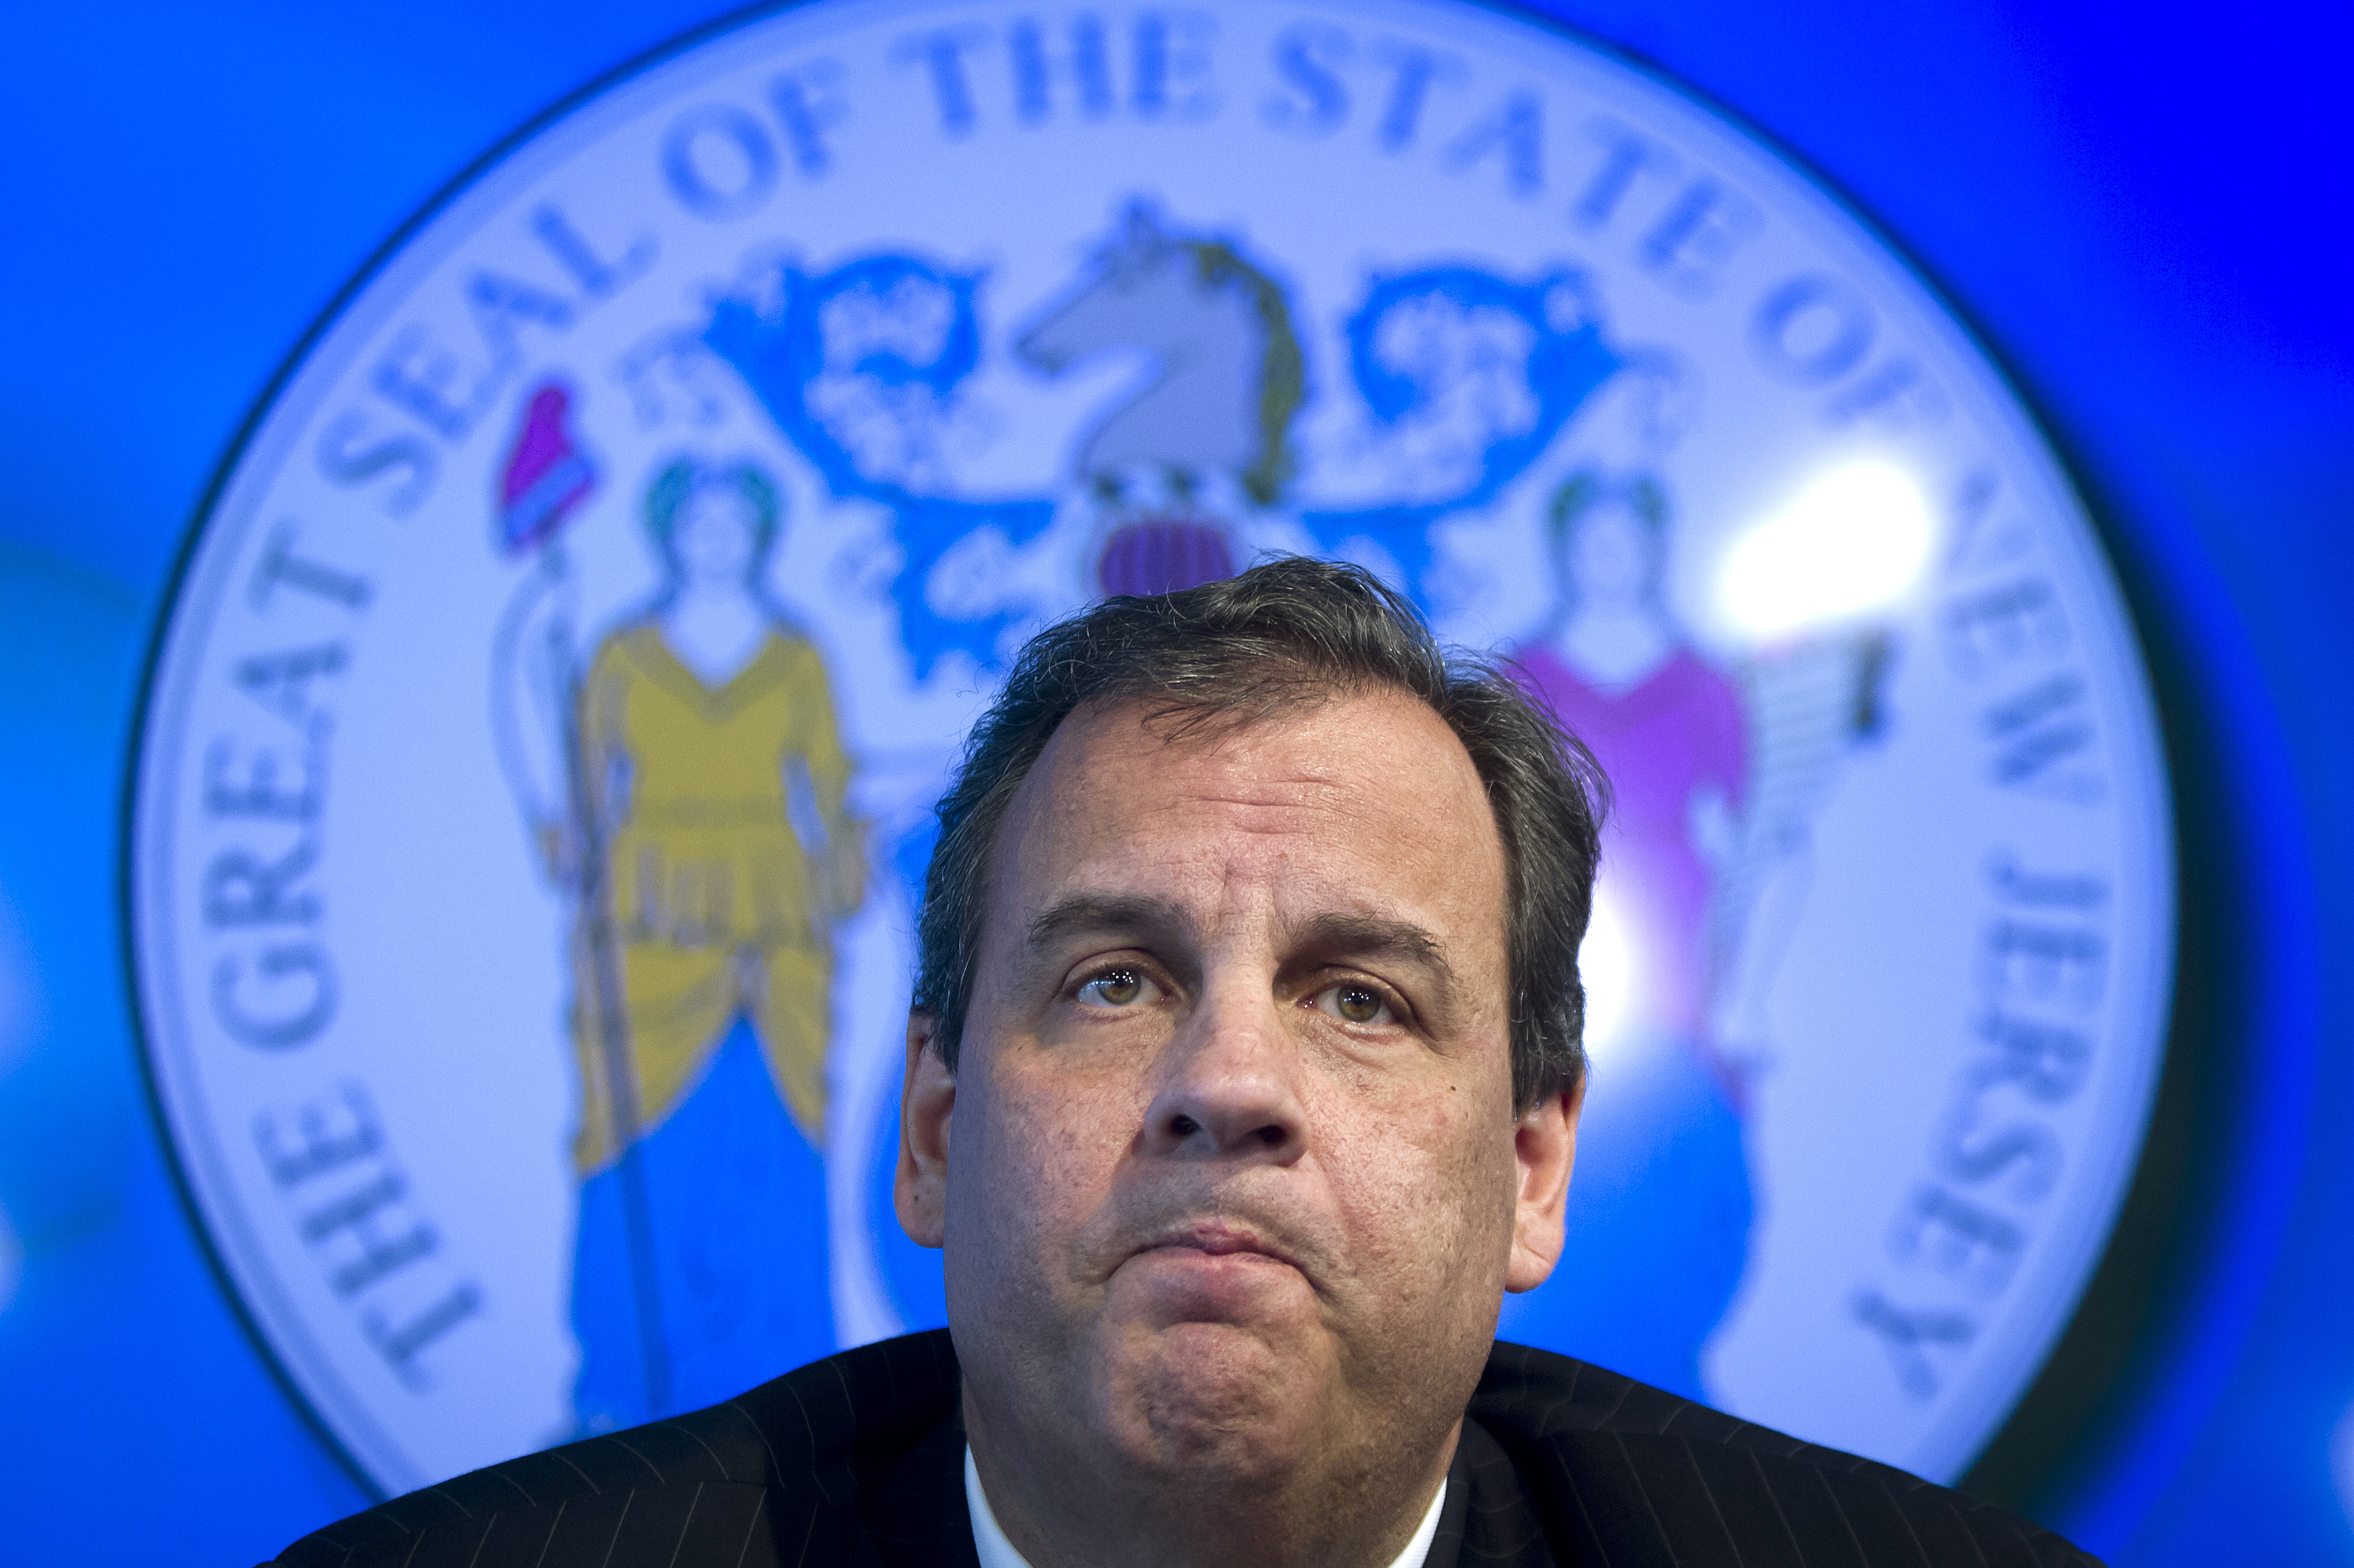 Gov. Christie is unbalanced on the issue of vaccinations.